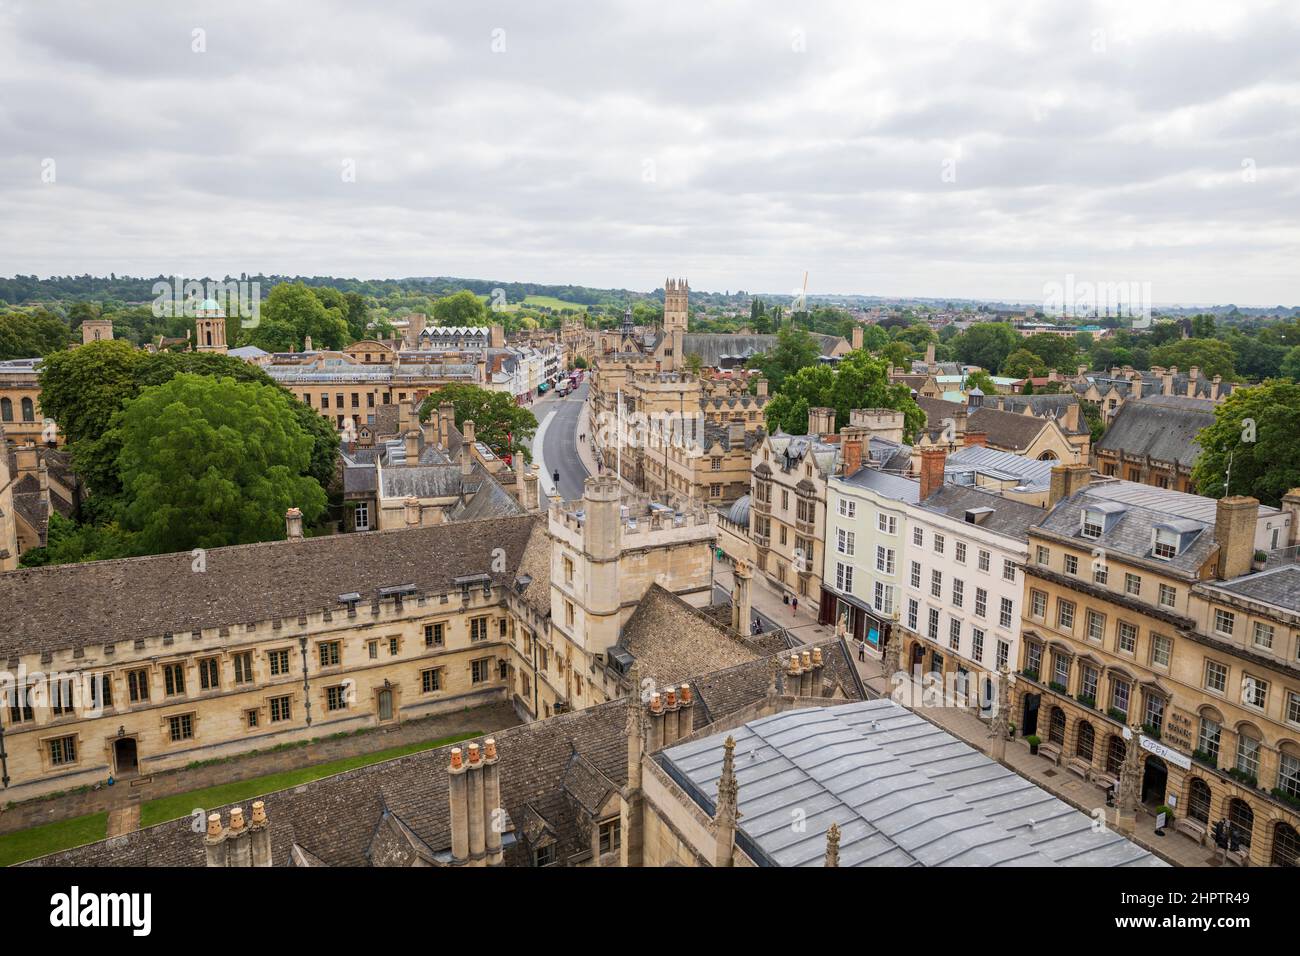 All Souls College in Oxford, England, with Magdalen Tower in the background. Stock Photo